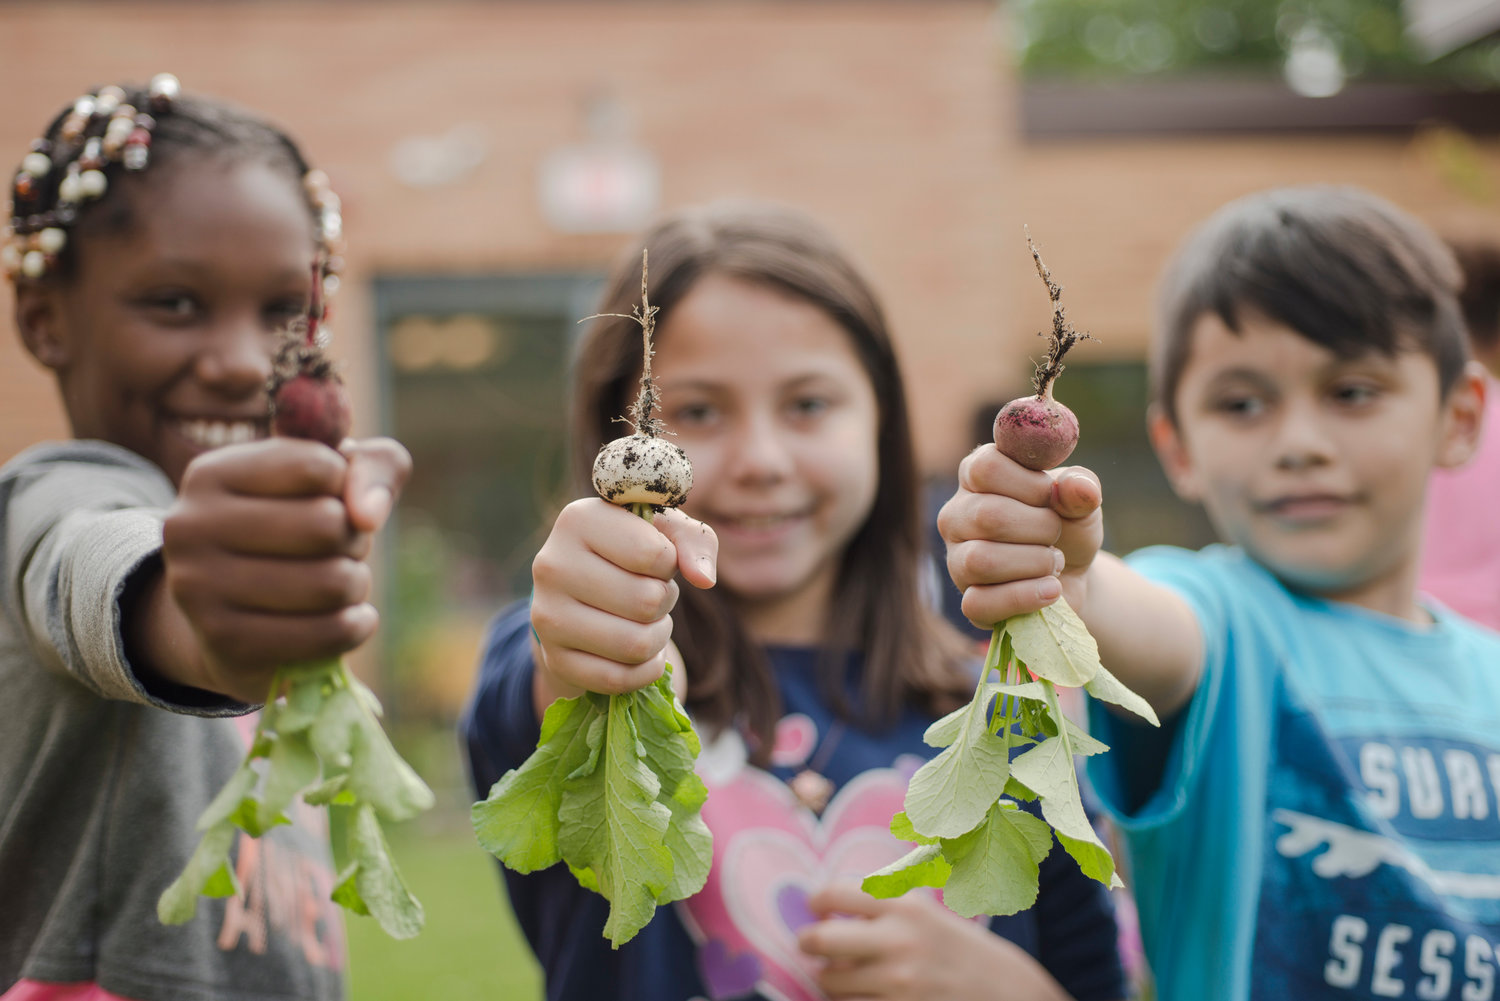 Hudson Valley Seed provided garden learning for students at Newburgh elementary schools with the help of a 2018 Make a Difference Grant.